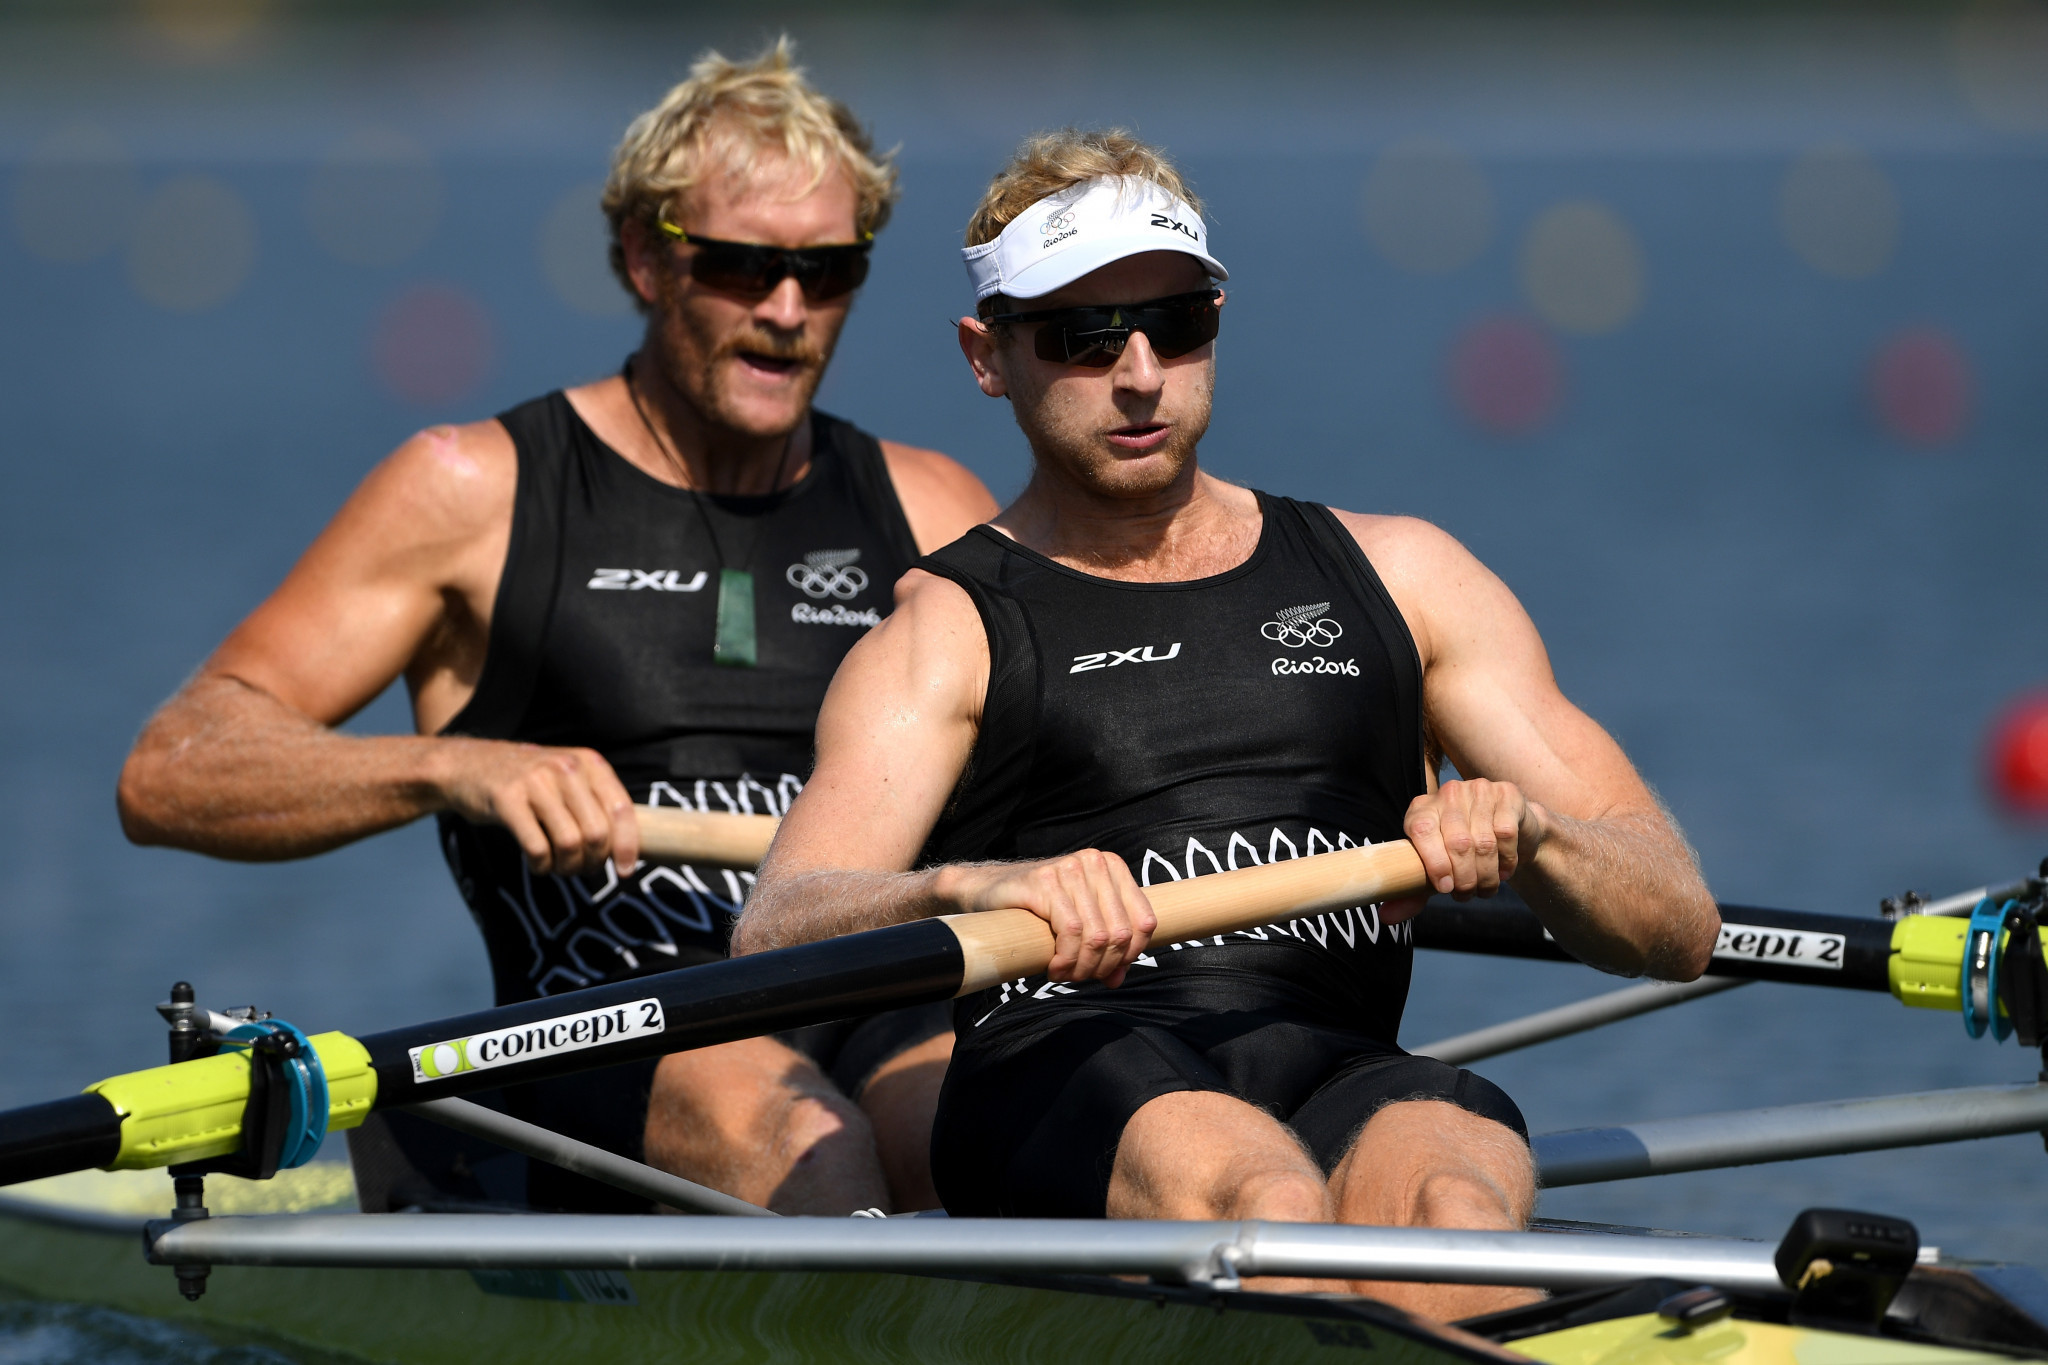 New Zealand's double Olympic champion Hamish Bond has announced a return to rowing after switching from the sport to cycling ©Getty Images